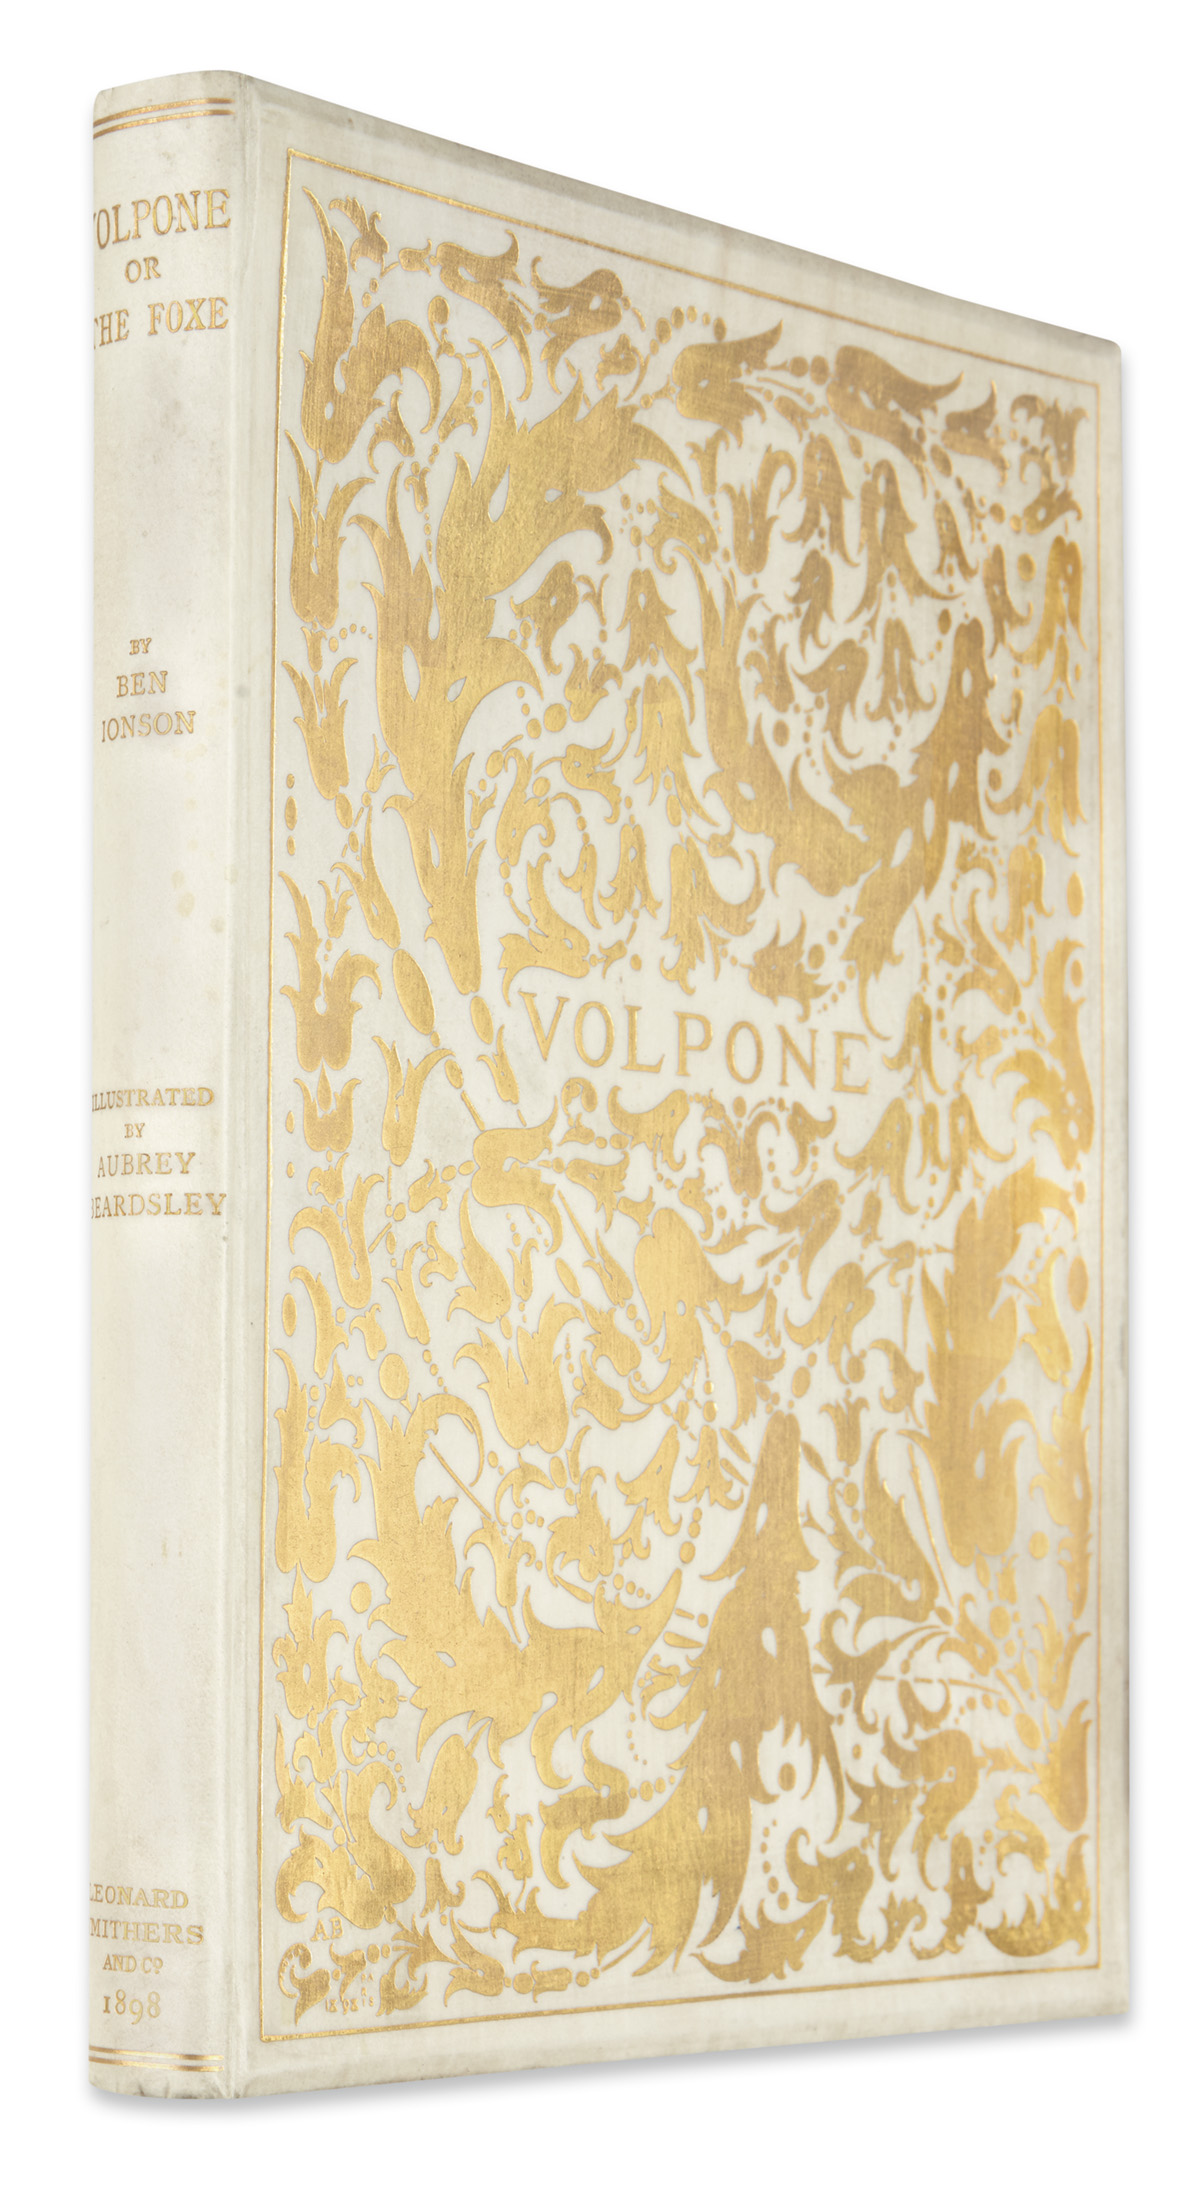 (BEARDSLEY, AUBREY). Jonson, Ben. Volpone: or, The Foxe . . . Together with a Eulogy of the Artist by Robert Ross.